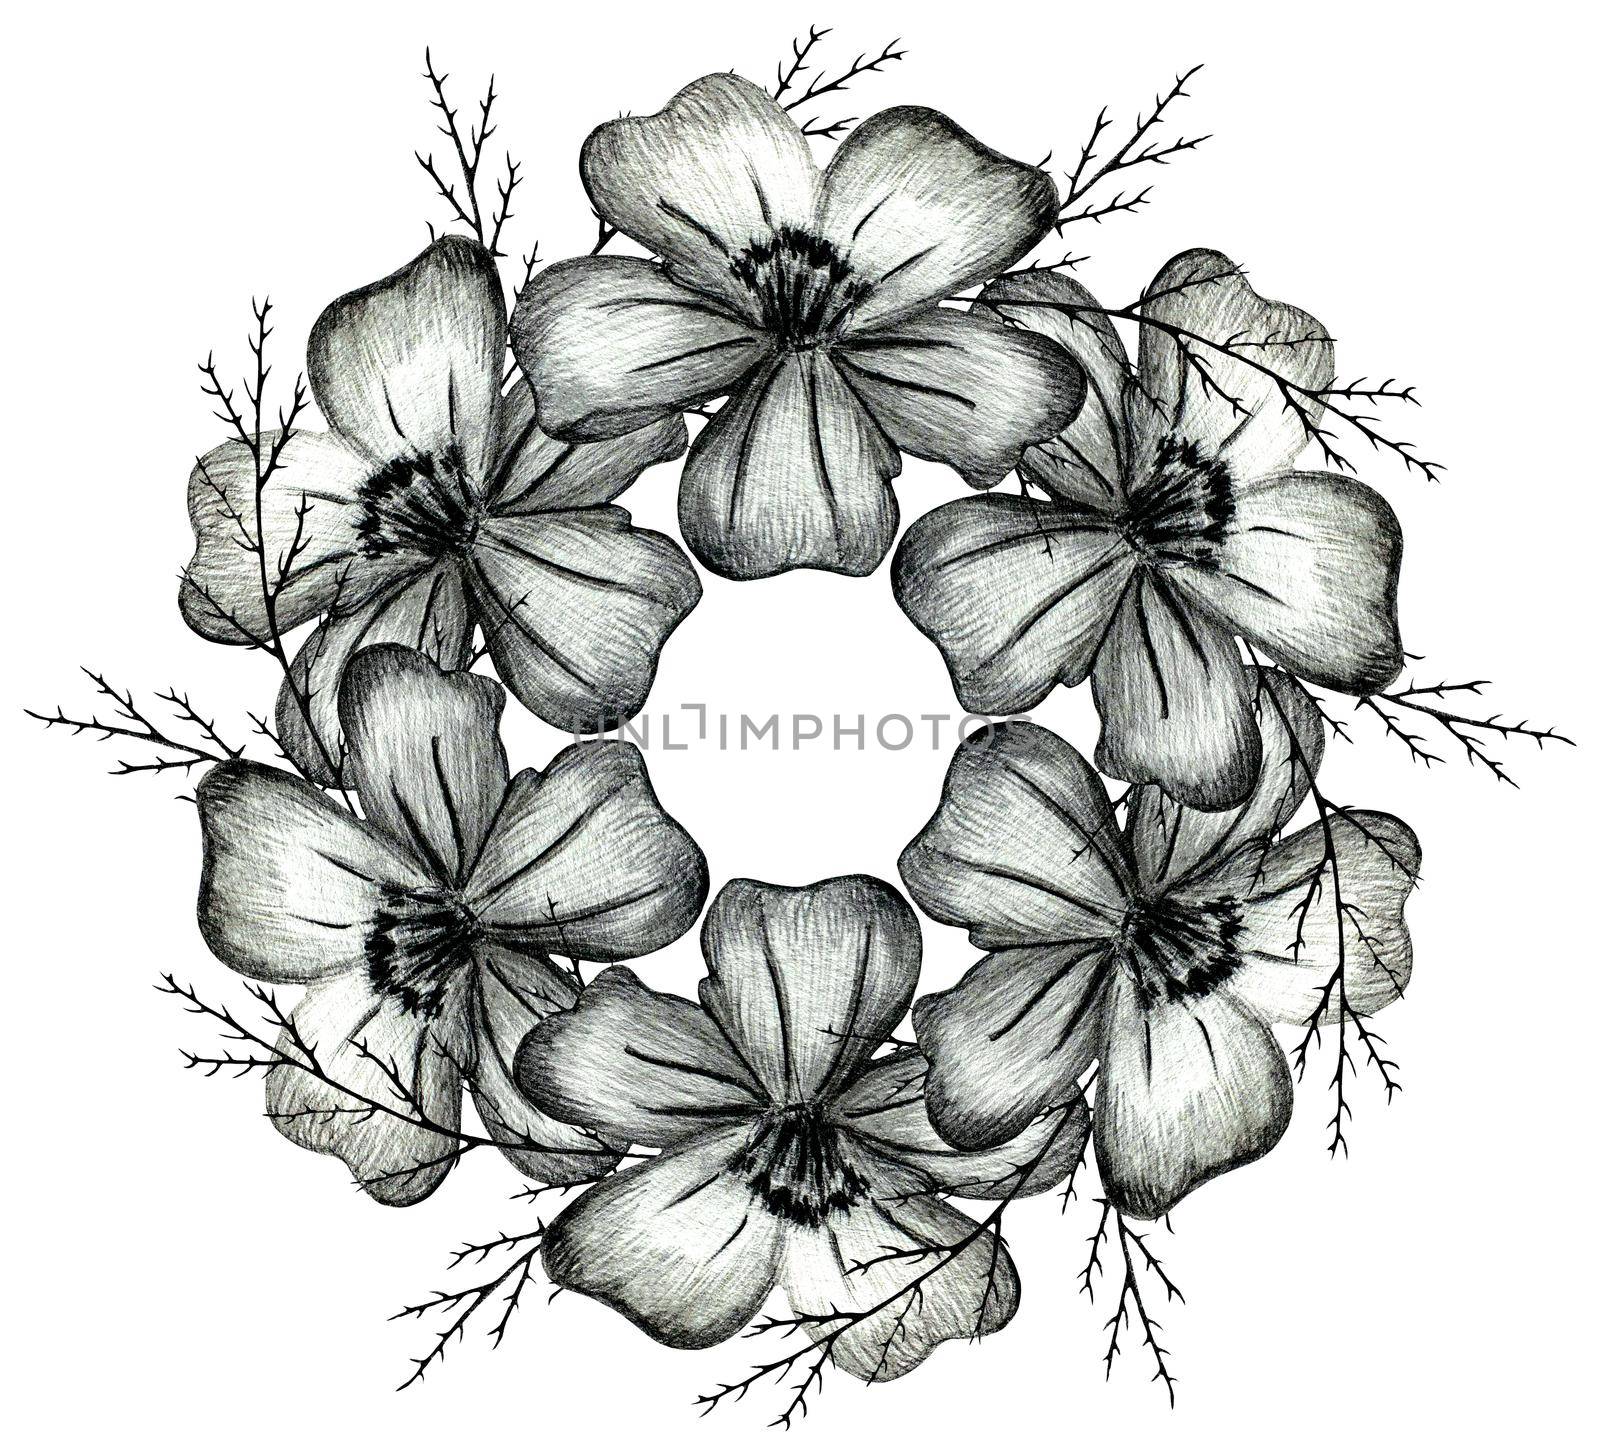 Black and White Hand Drawn Marigold Flower Round Composition Isolated on White Background. Marigold Flower Composition Drawn by Black Pencil.